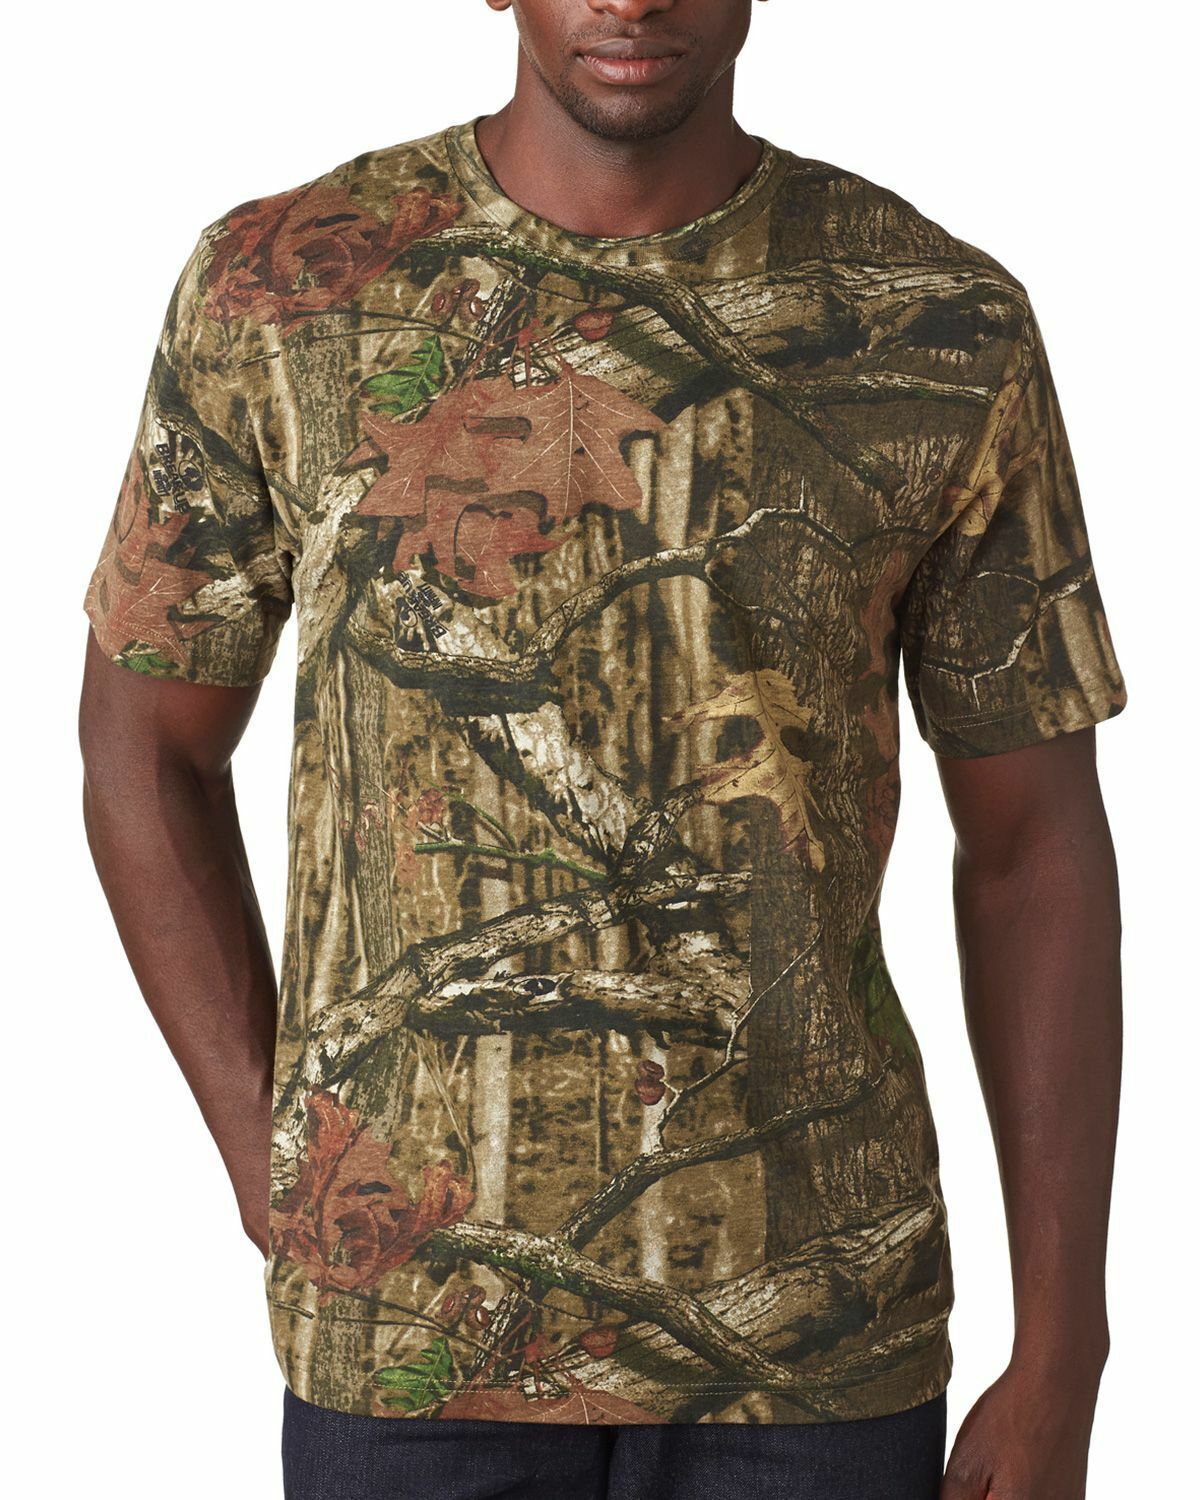 Men's Mossy Oak Camouflage T-Shirt S To 4x